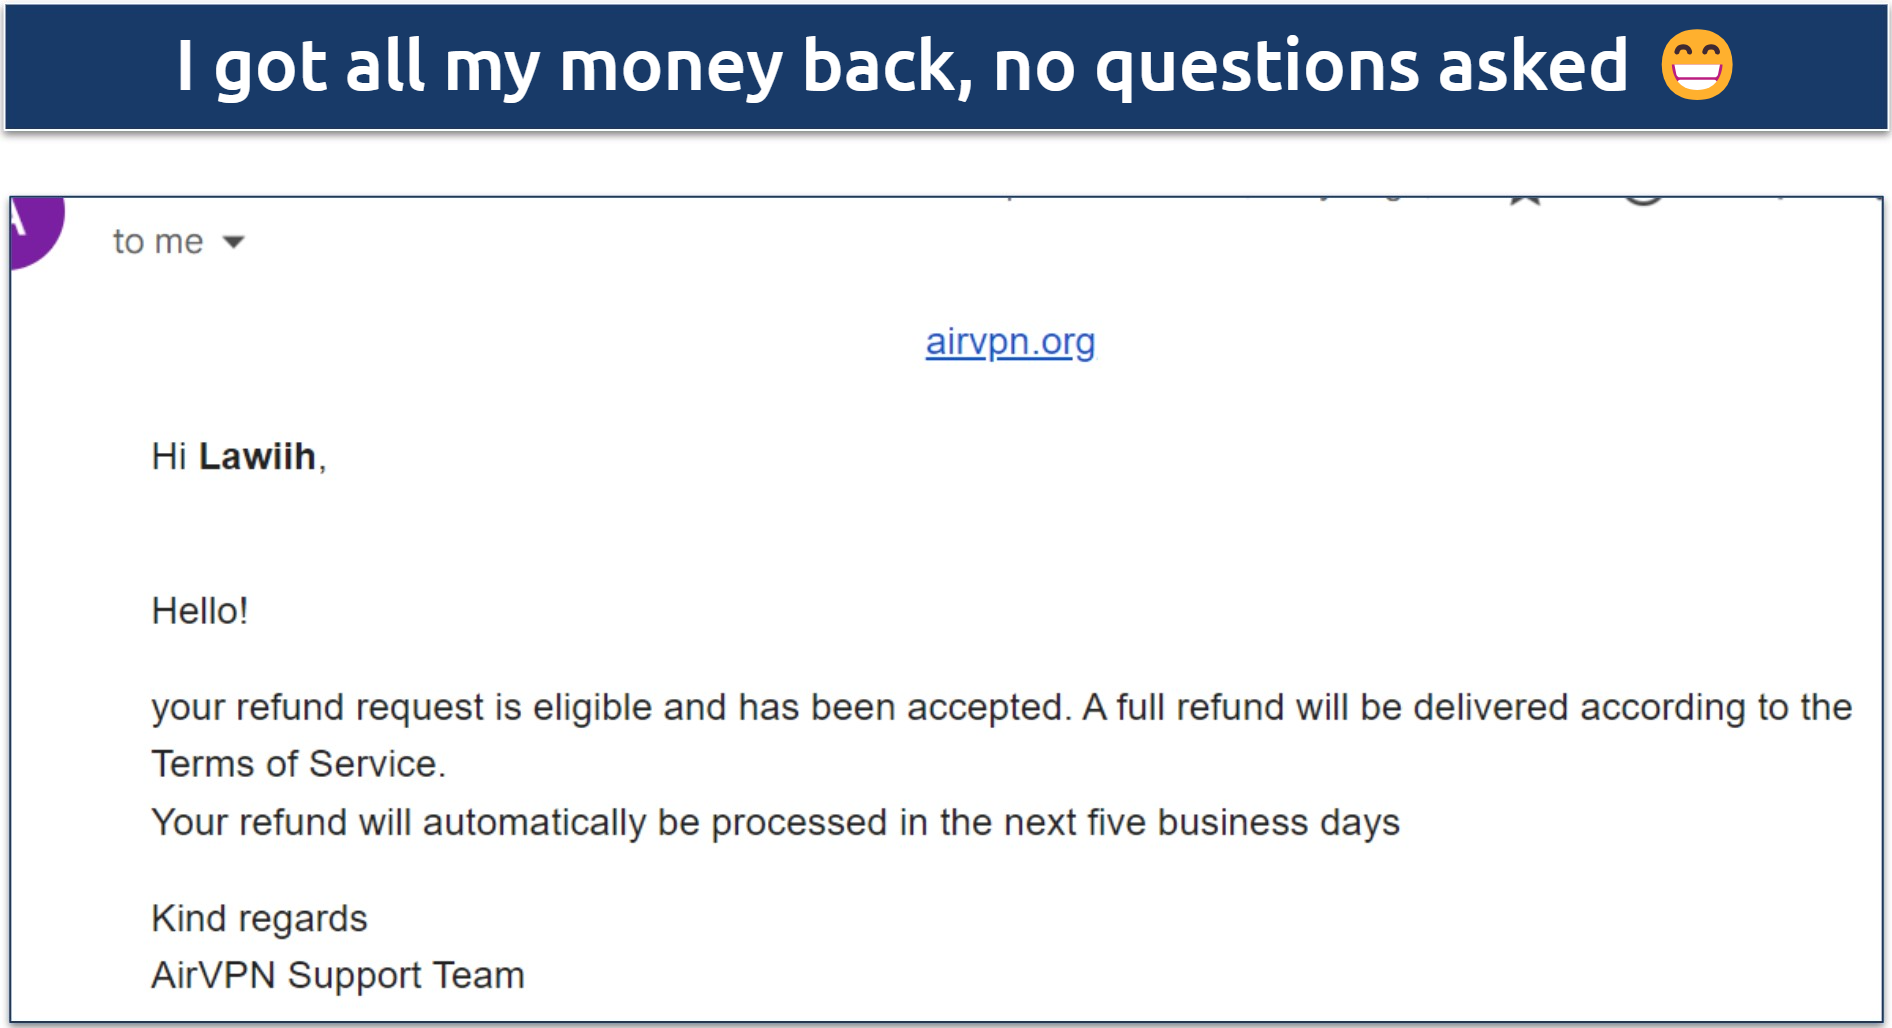  A screenshot showing AirVPN's adherence to its advertised refund policy